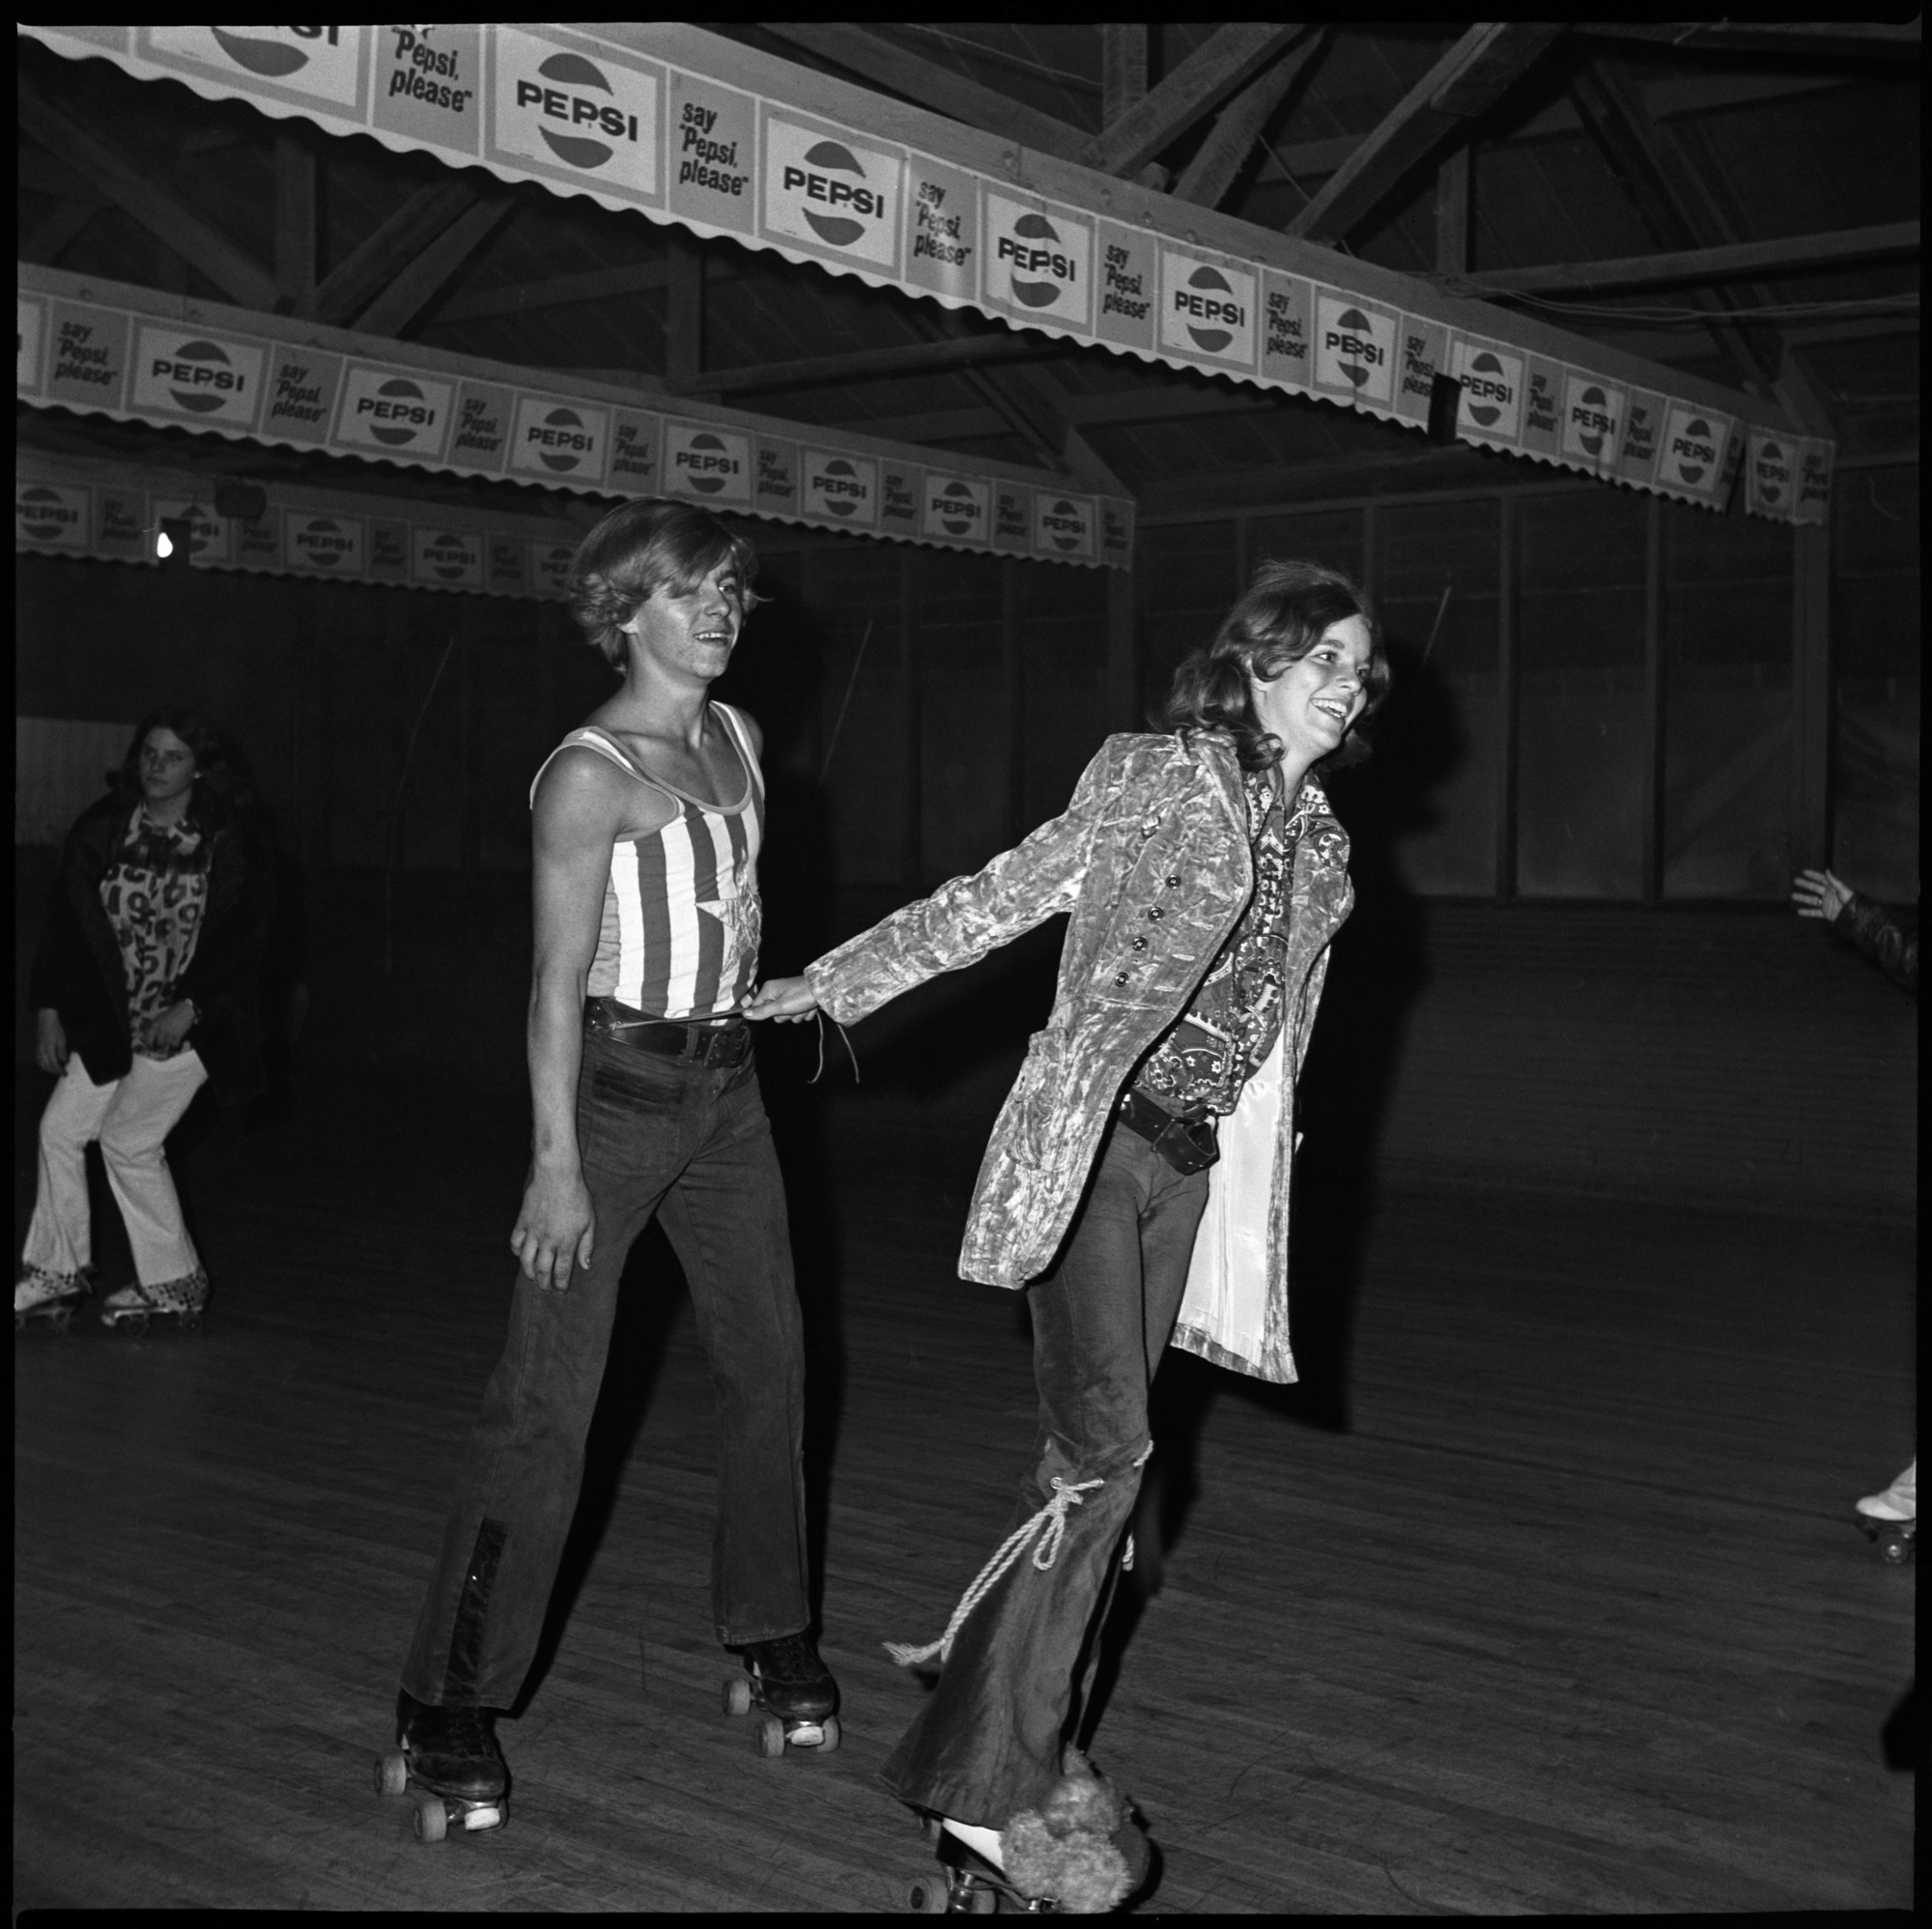 long-lost photographs of southern 70s roller rink teens - i-D